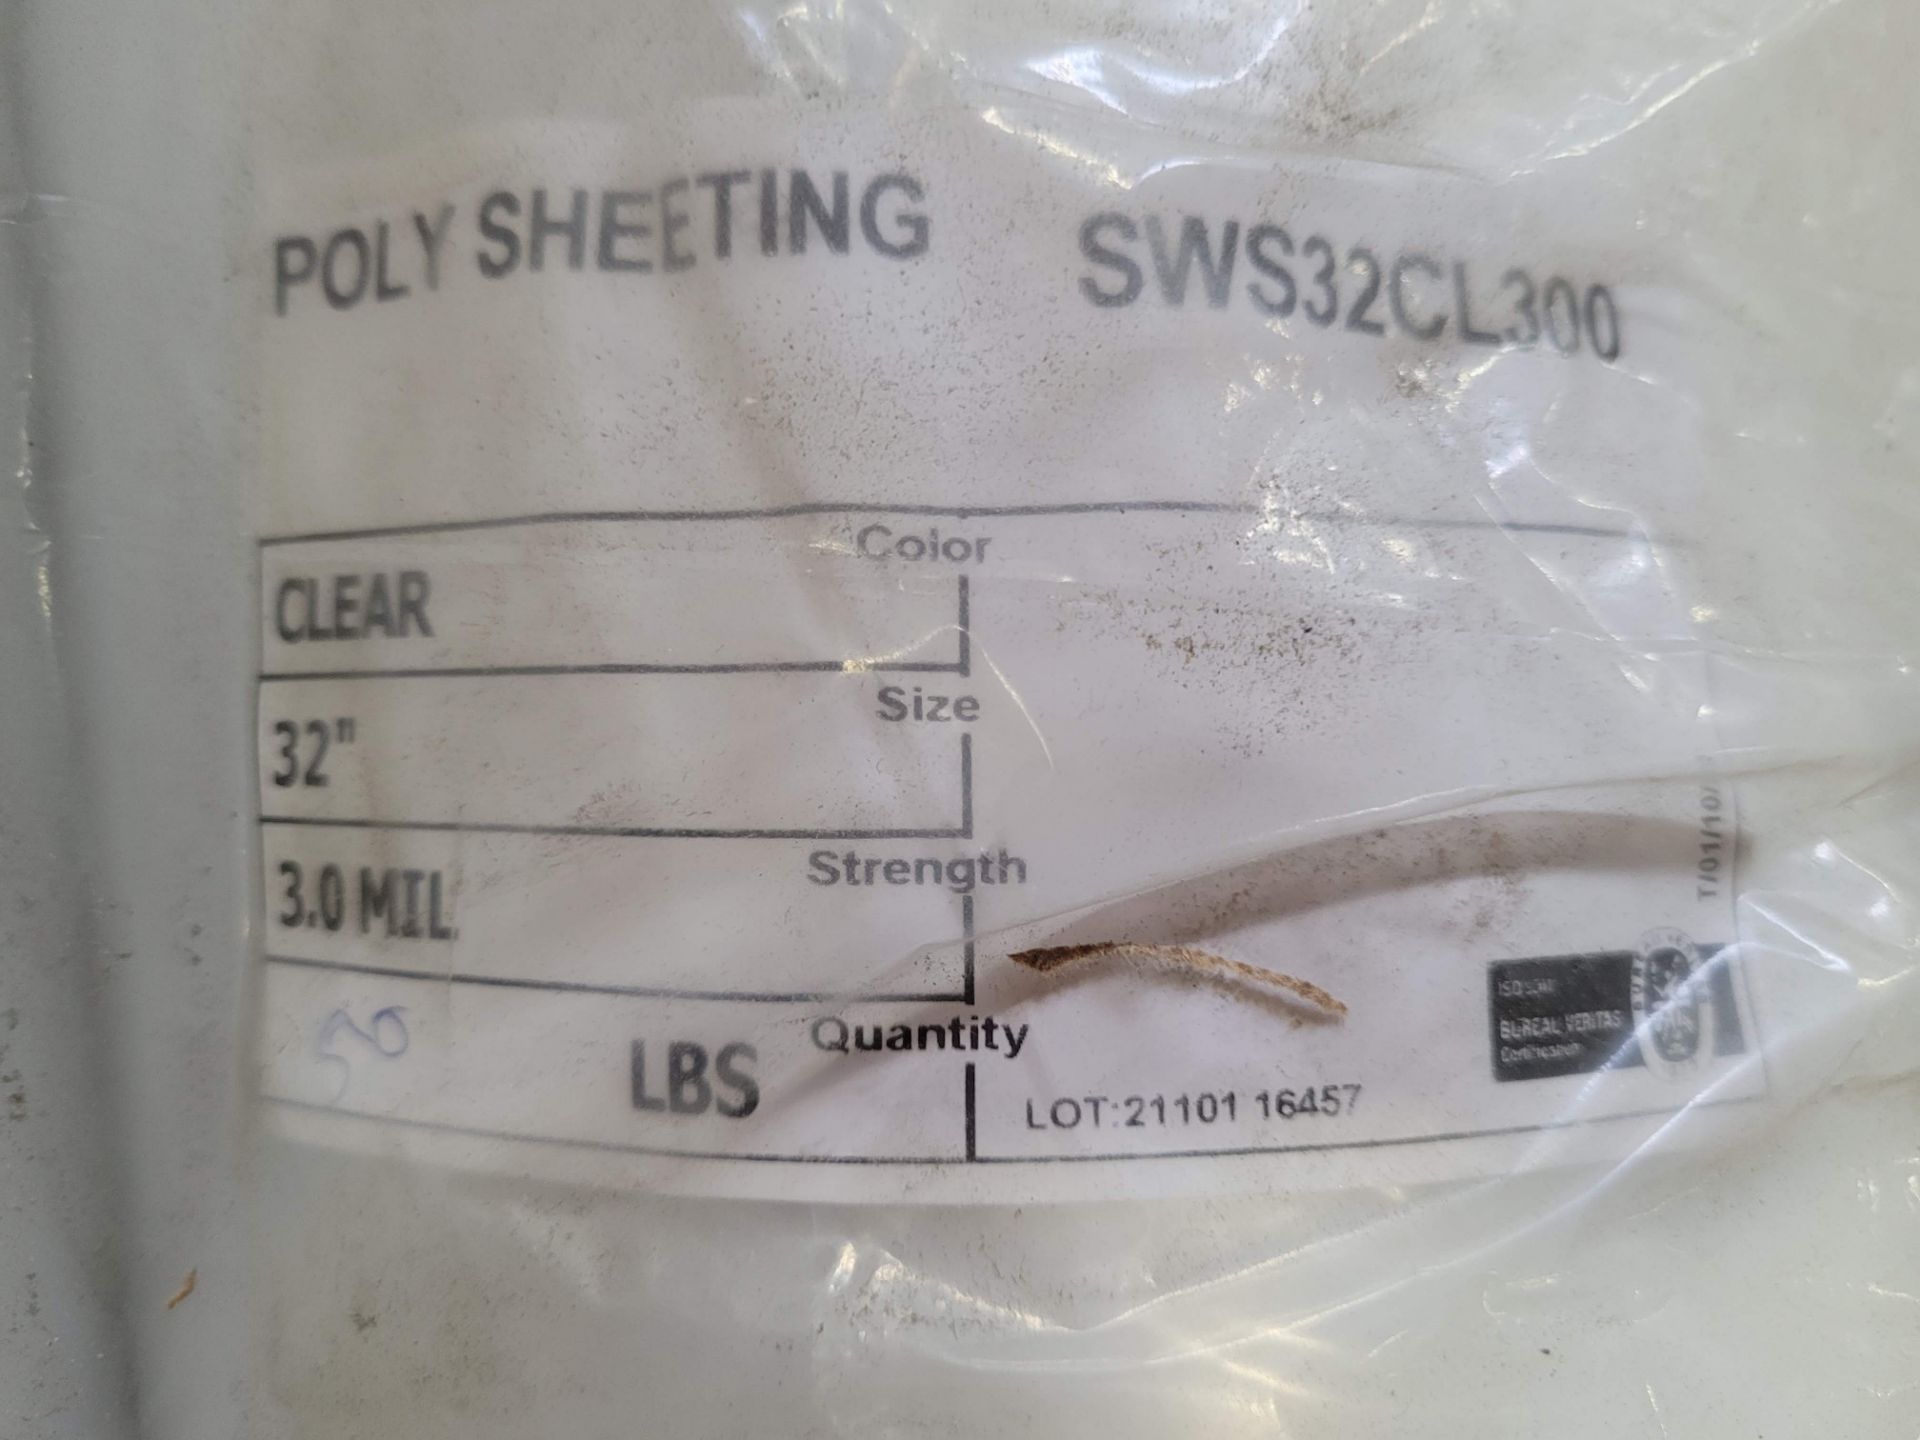 LOT - CLEAR 32" POLY SHEETING - Image 2 of 2